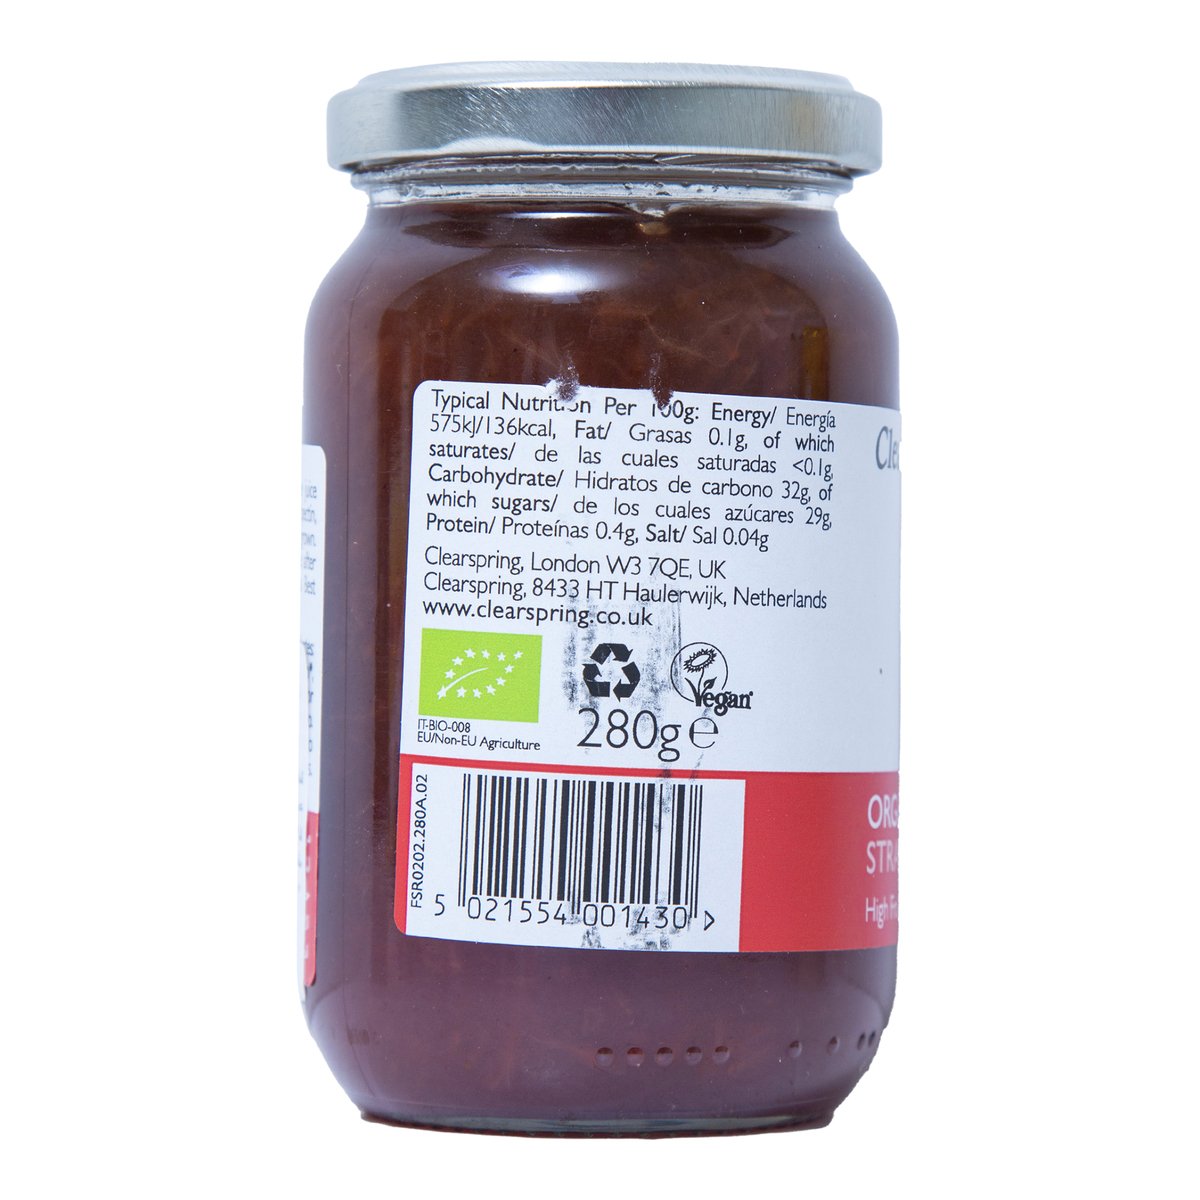 Clearspring Organic Strawberry Fruit Spread 280 g